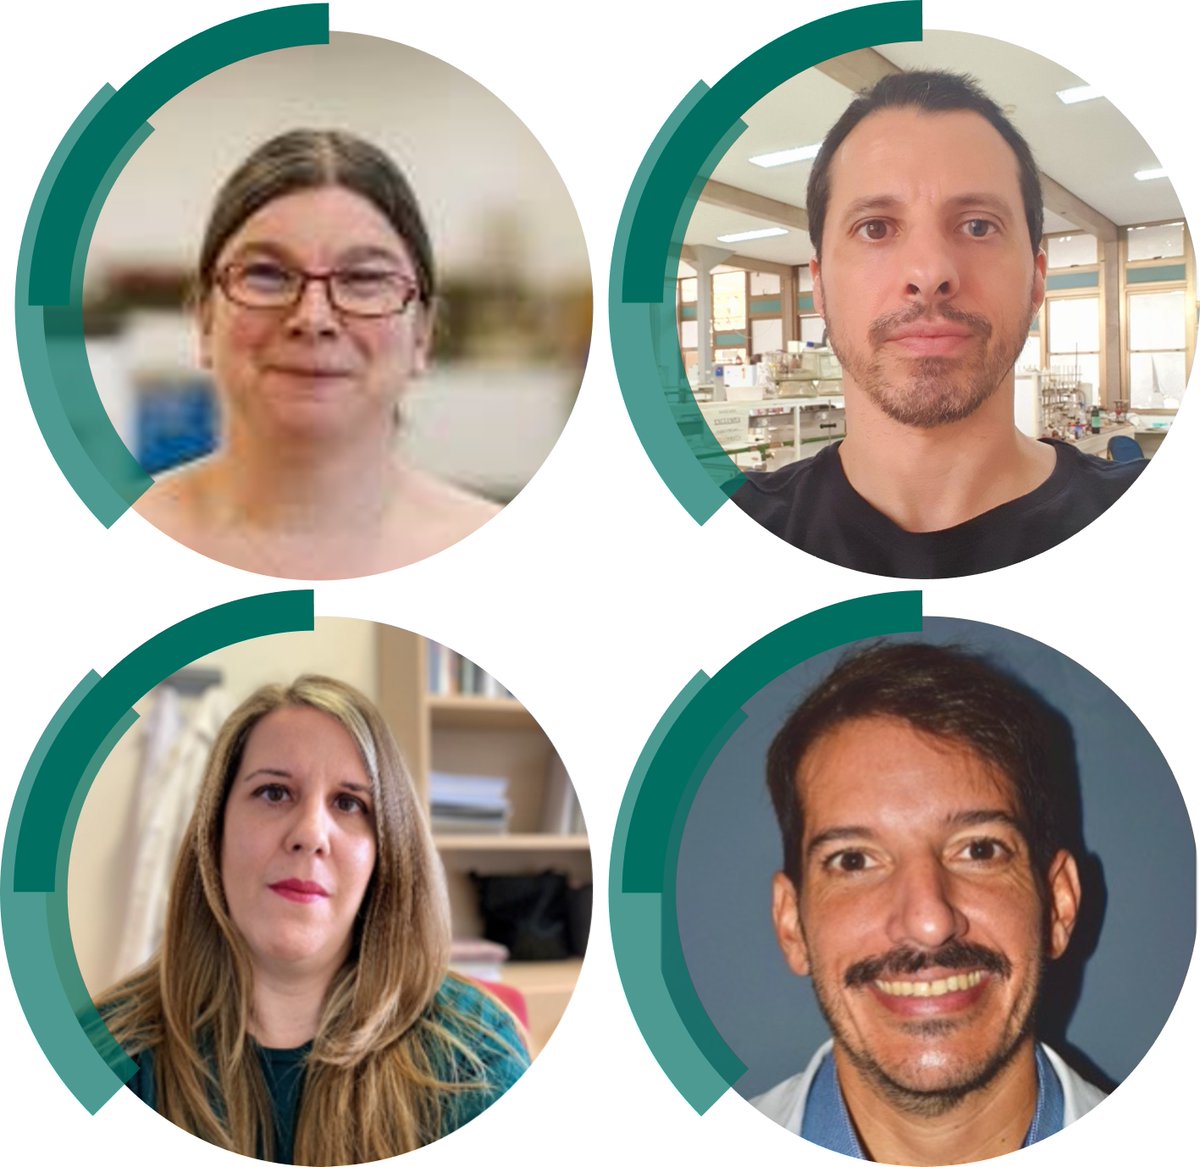 📢Check out our latest #AdvancingwithAdvances blog about #PerfectingPeerReview from academic editors➡️rsc.li/3UOxaW1 Featuring reviewing tips from Donna Arnold (@D_C_Arnold, @UniKent), Brenno Neto, Beatriz Jurado Sánchez (@BeatrizJuradoS1) and Rodrigo Octavio de Souza